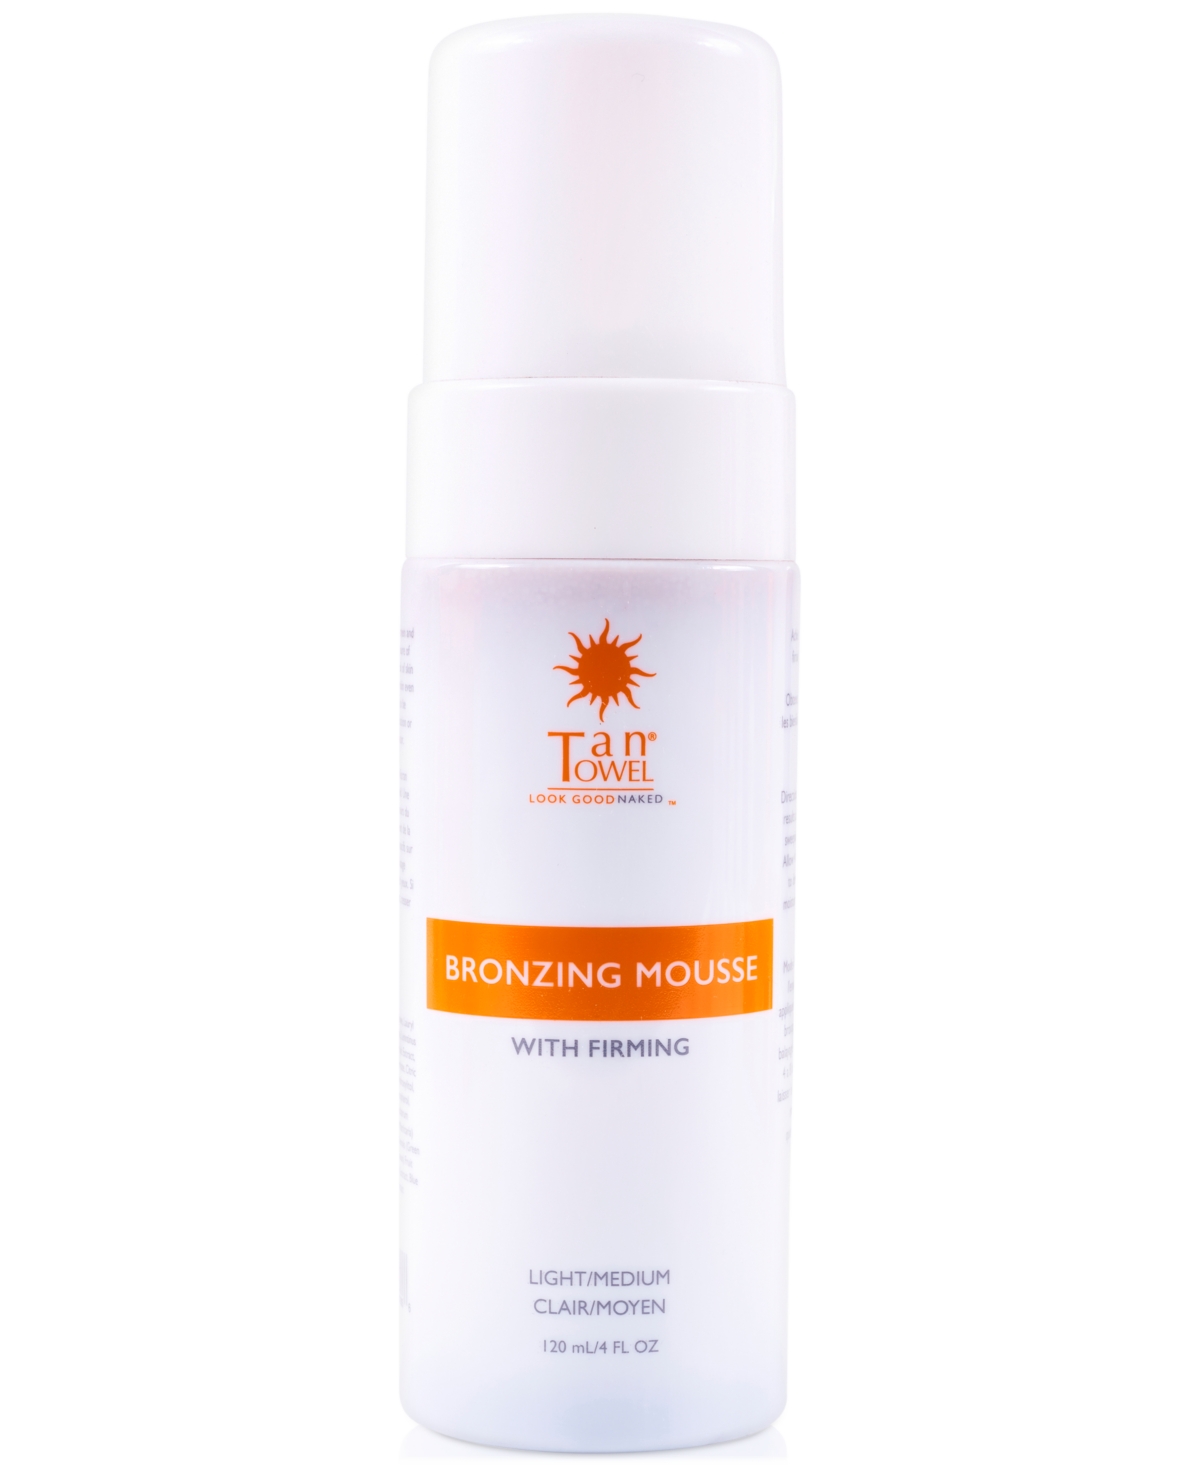 Tantowel Bronzing Mousse In No Color